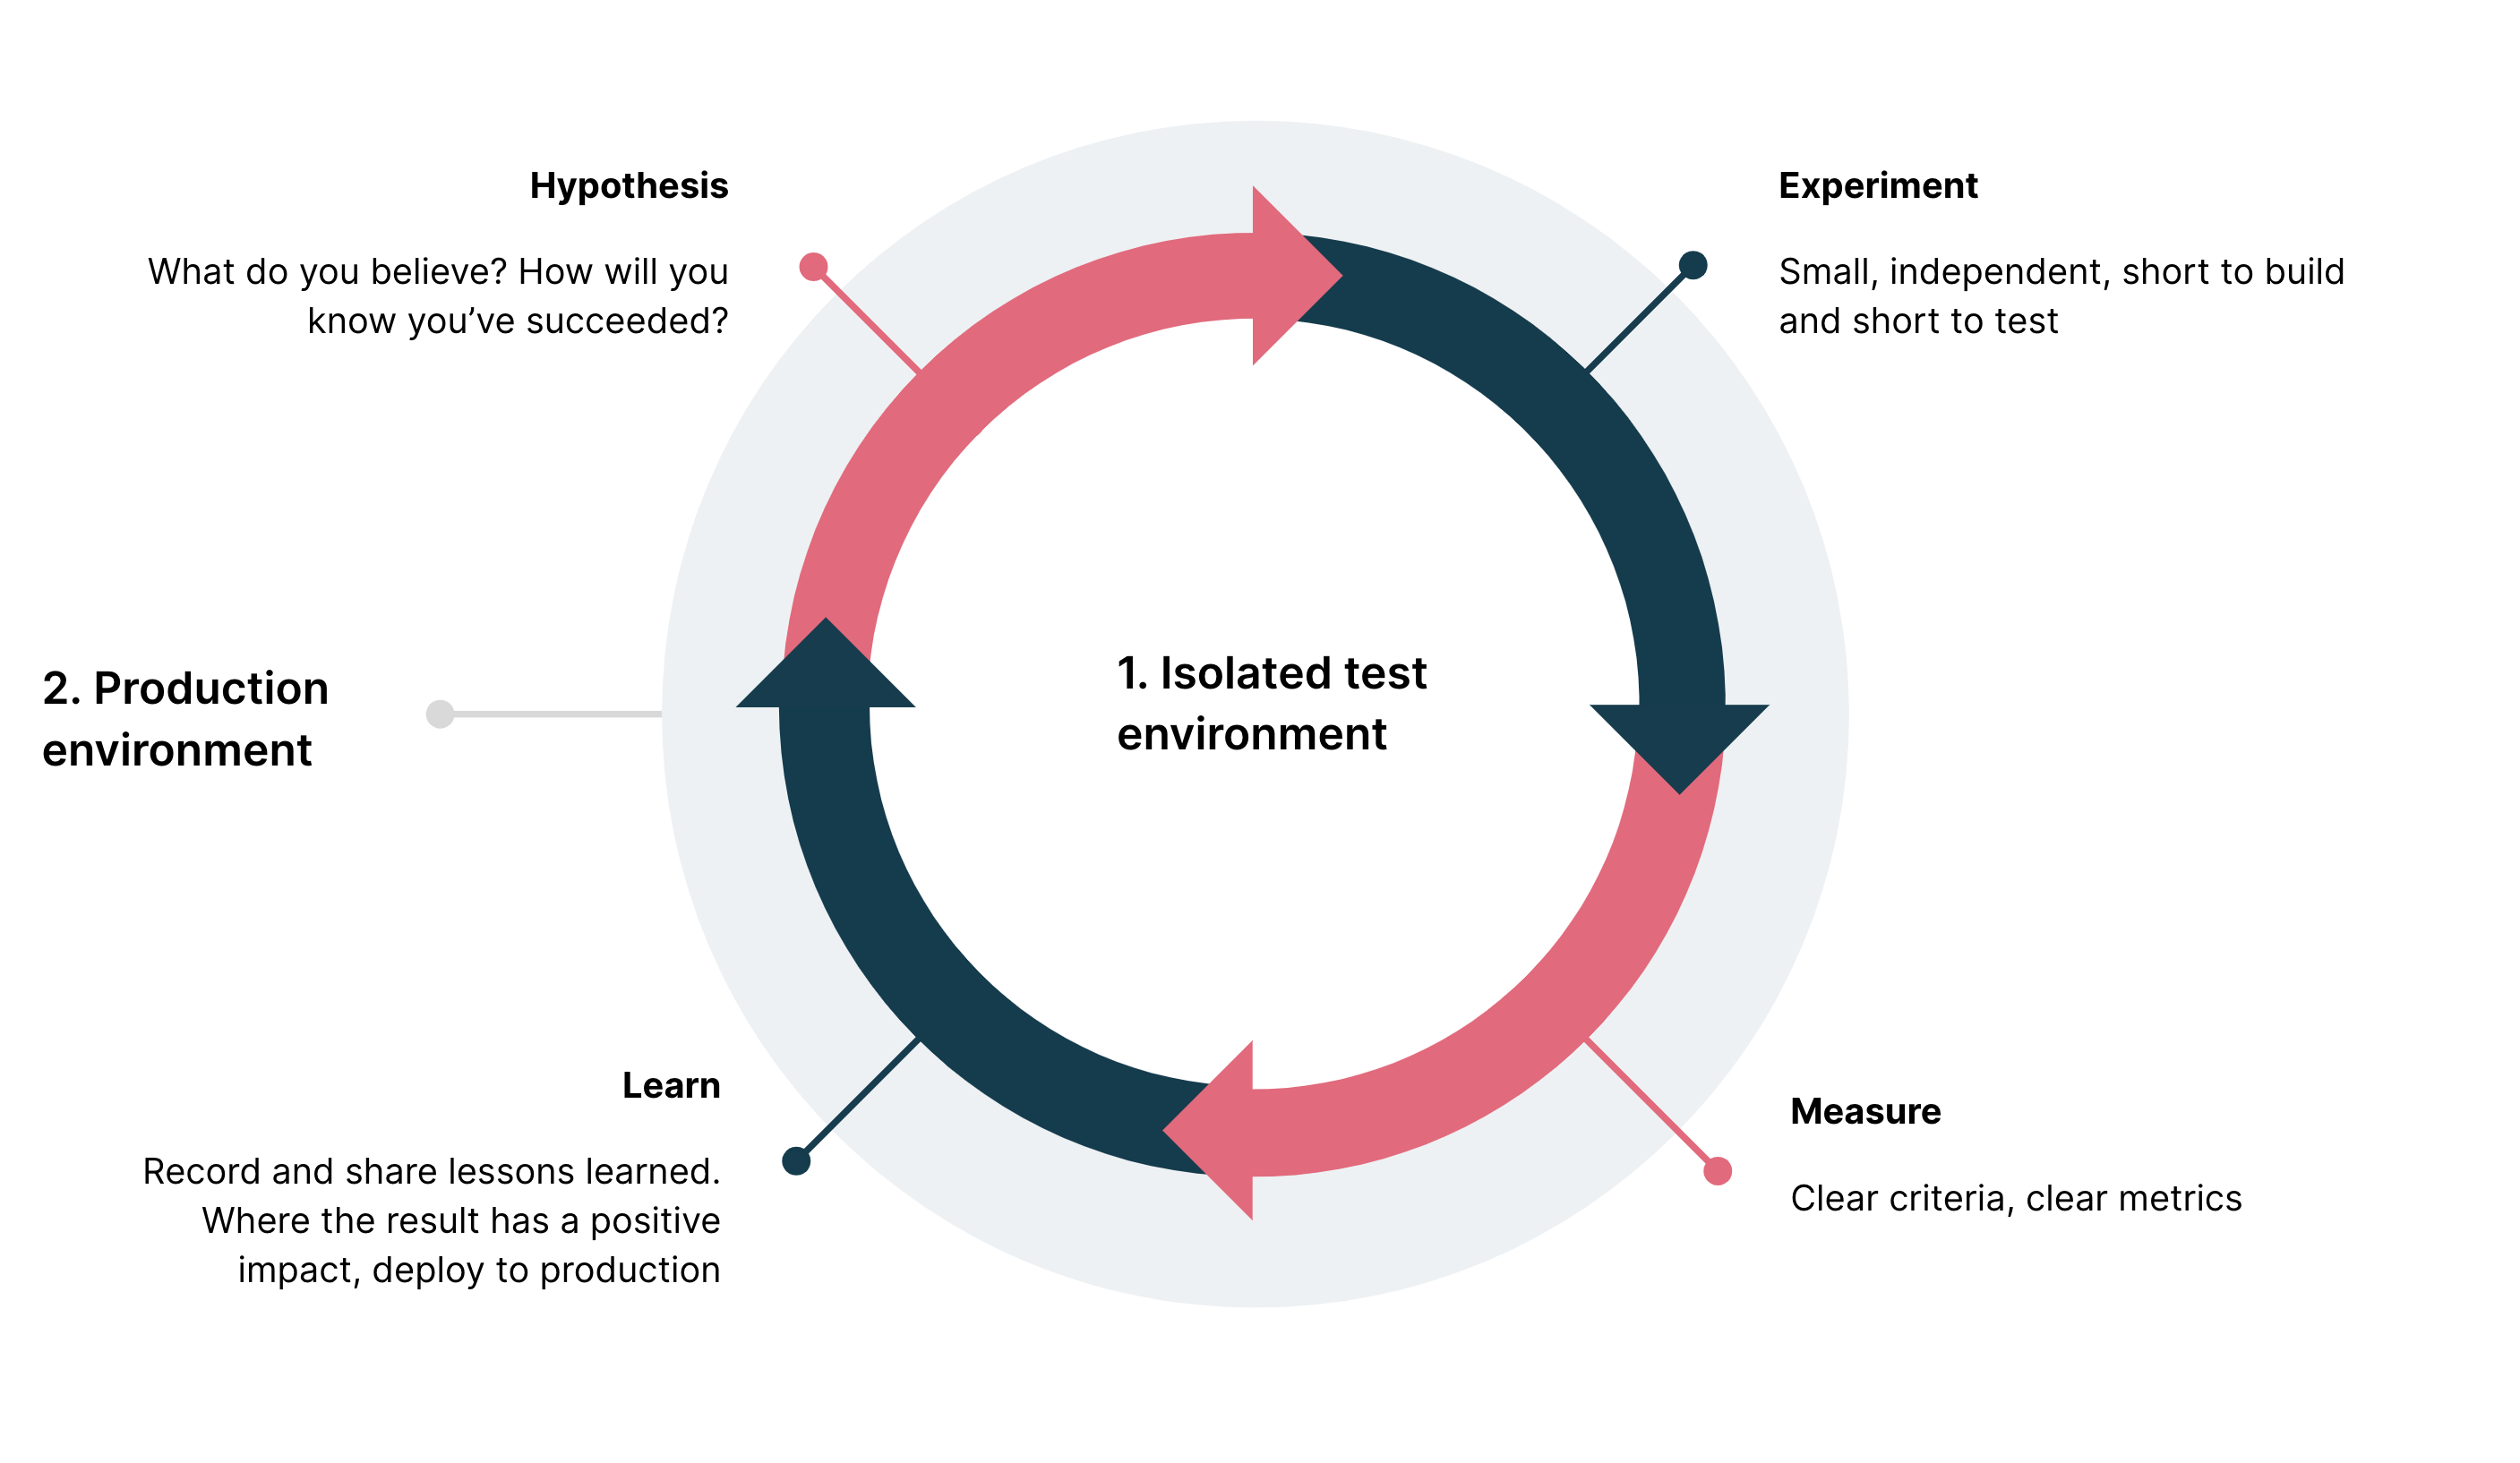 Fast feedback delivered through feedback loops is critical in determining the next step.